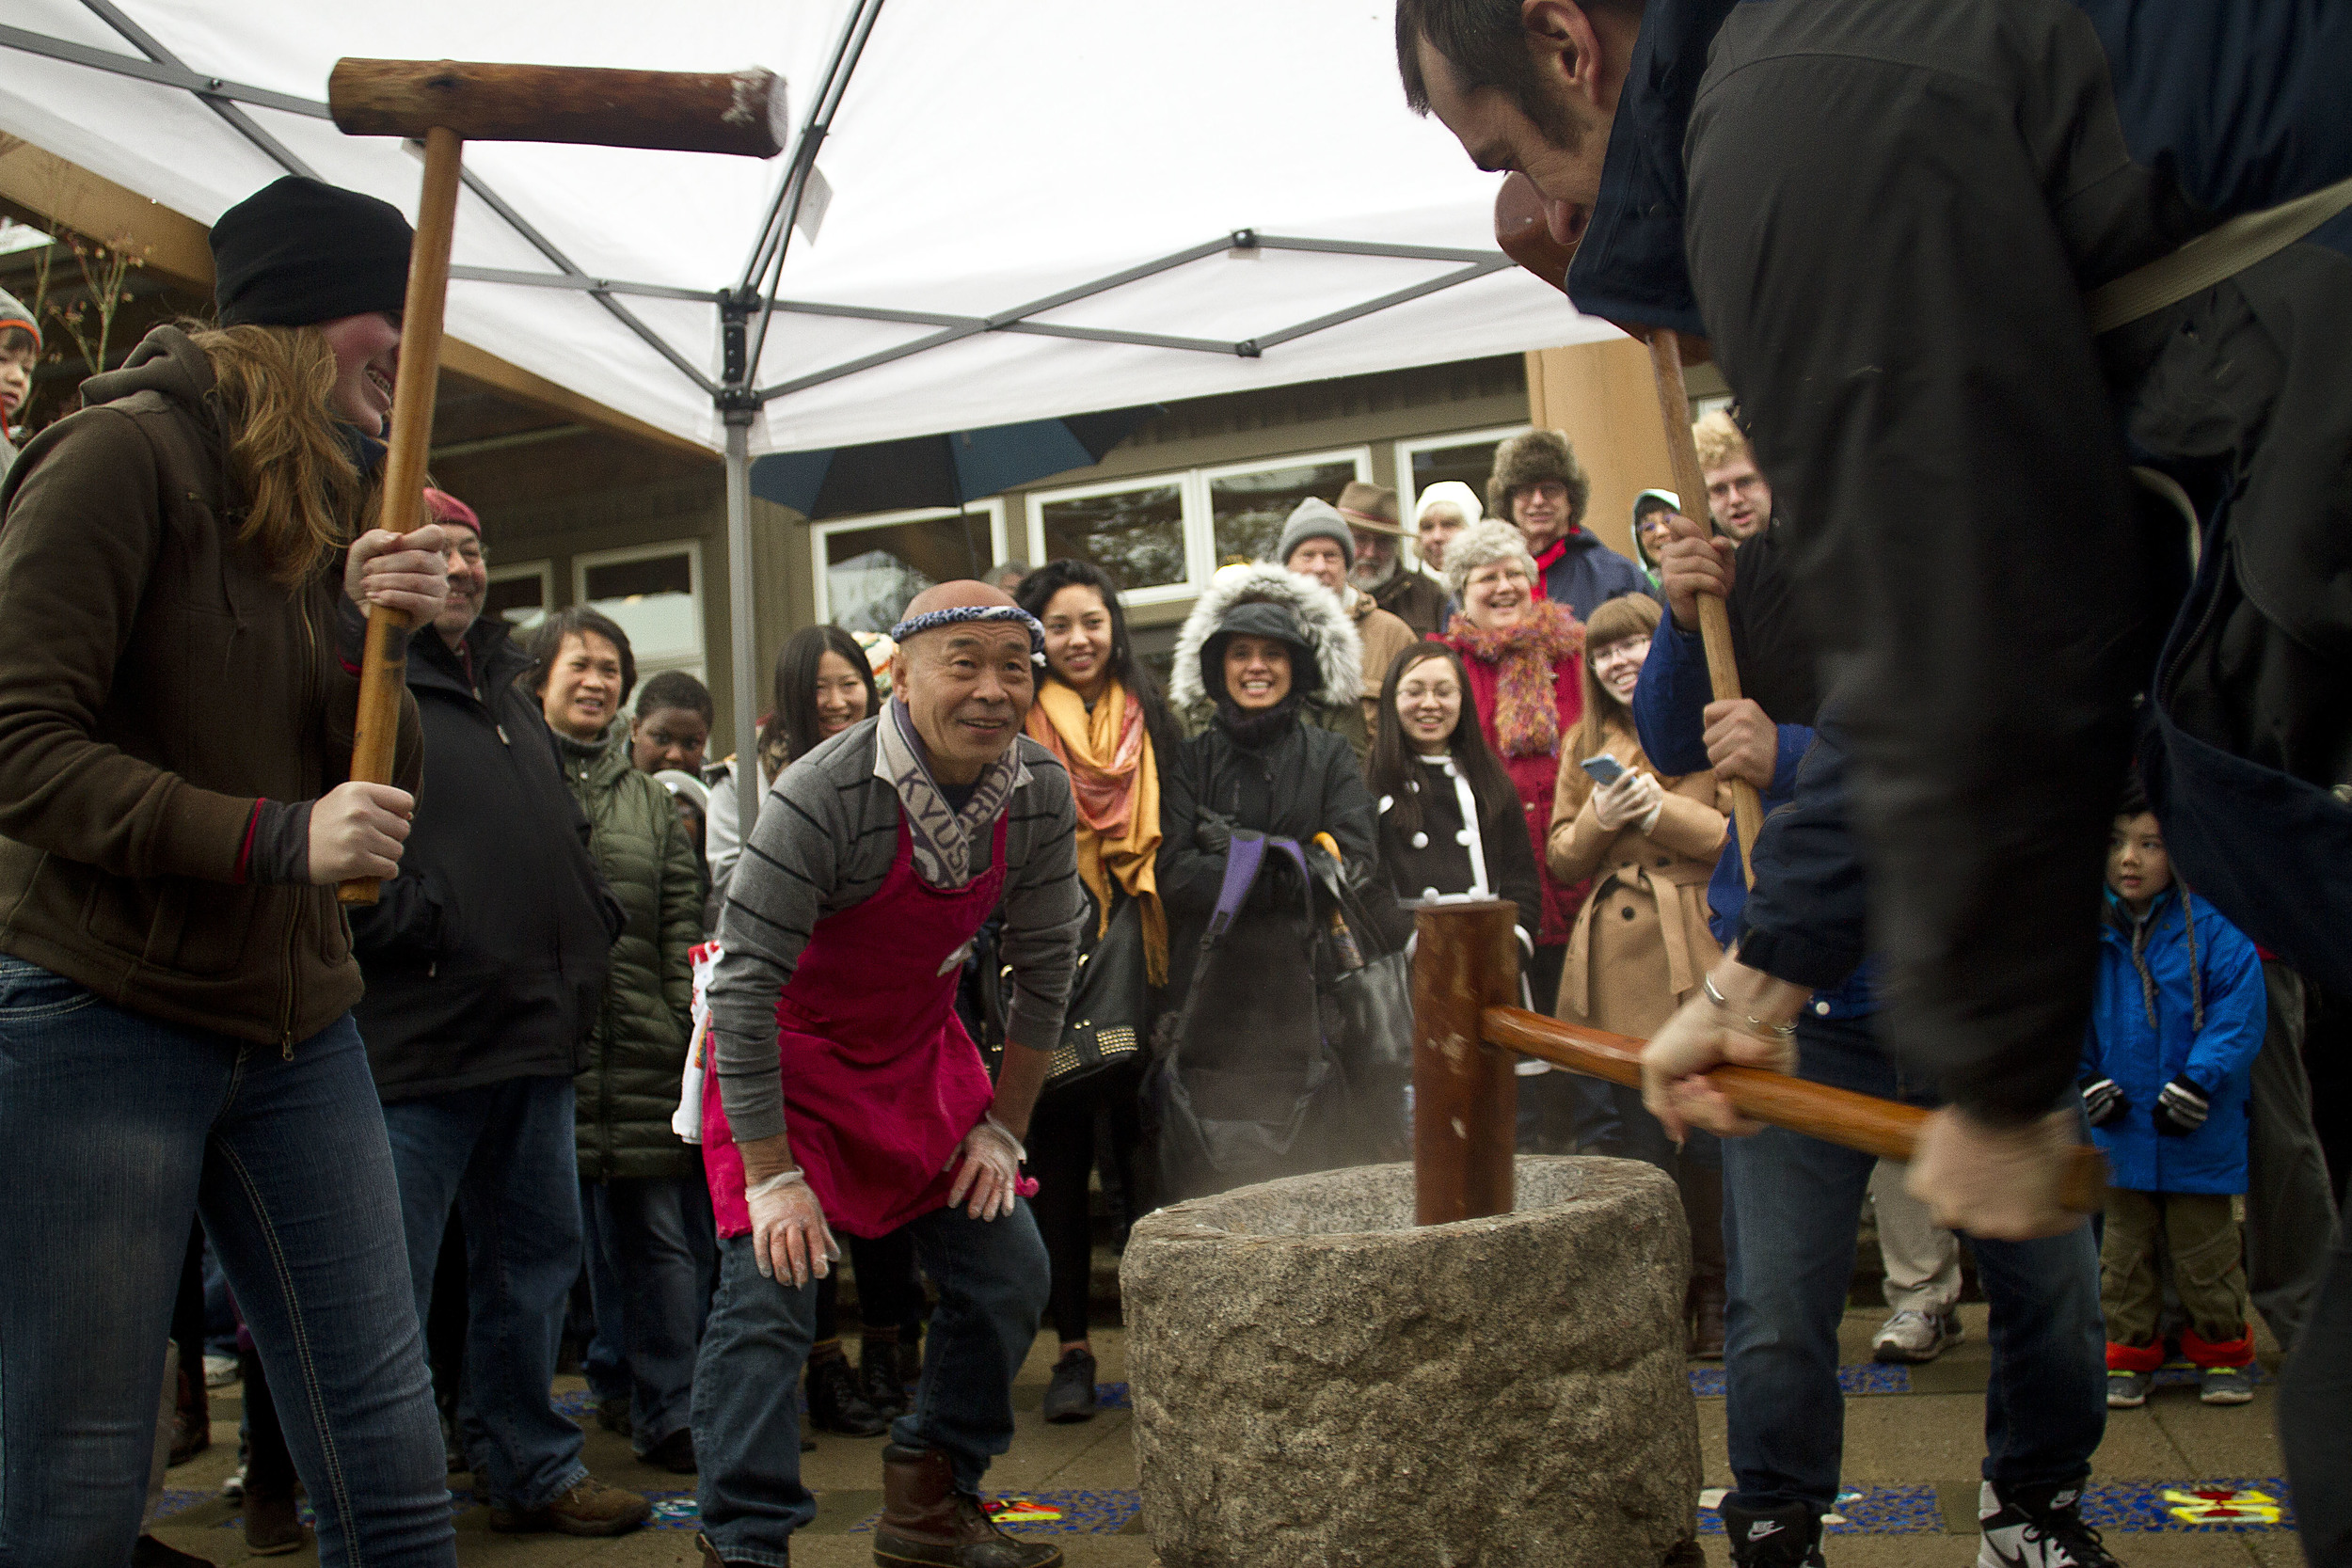   Shoichi Sugiyama, a volunteer with the Bainbridge Island Japanese American Community and staple figure at the island’s annual New Year’s mochi tsuki event, watches as the guests he instructed take their turn pounding the steamed rice with large woo